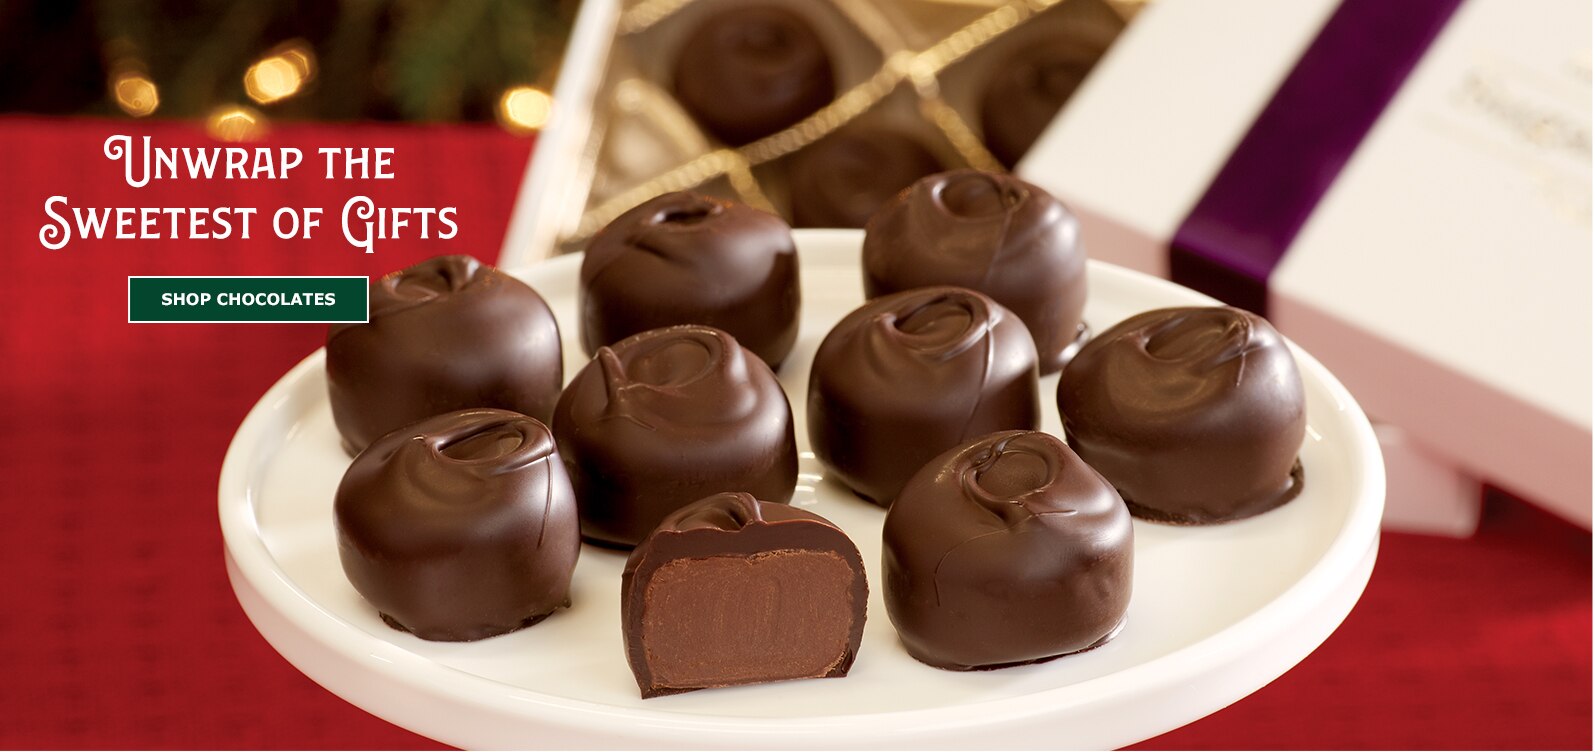 Unwrap the Sweetest of Gifts. Shop Chocolates